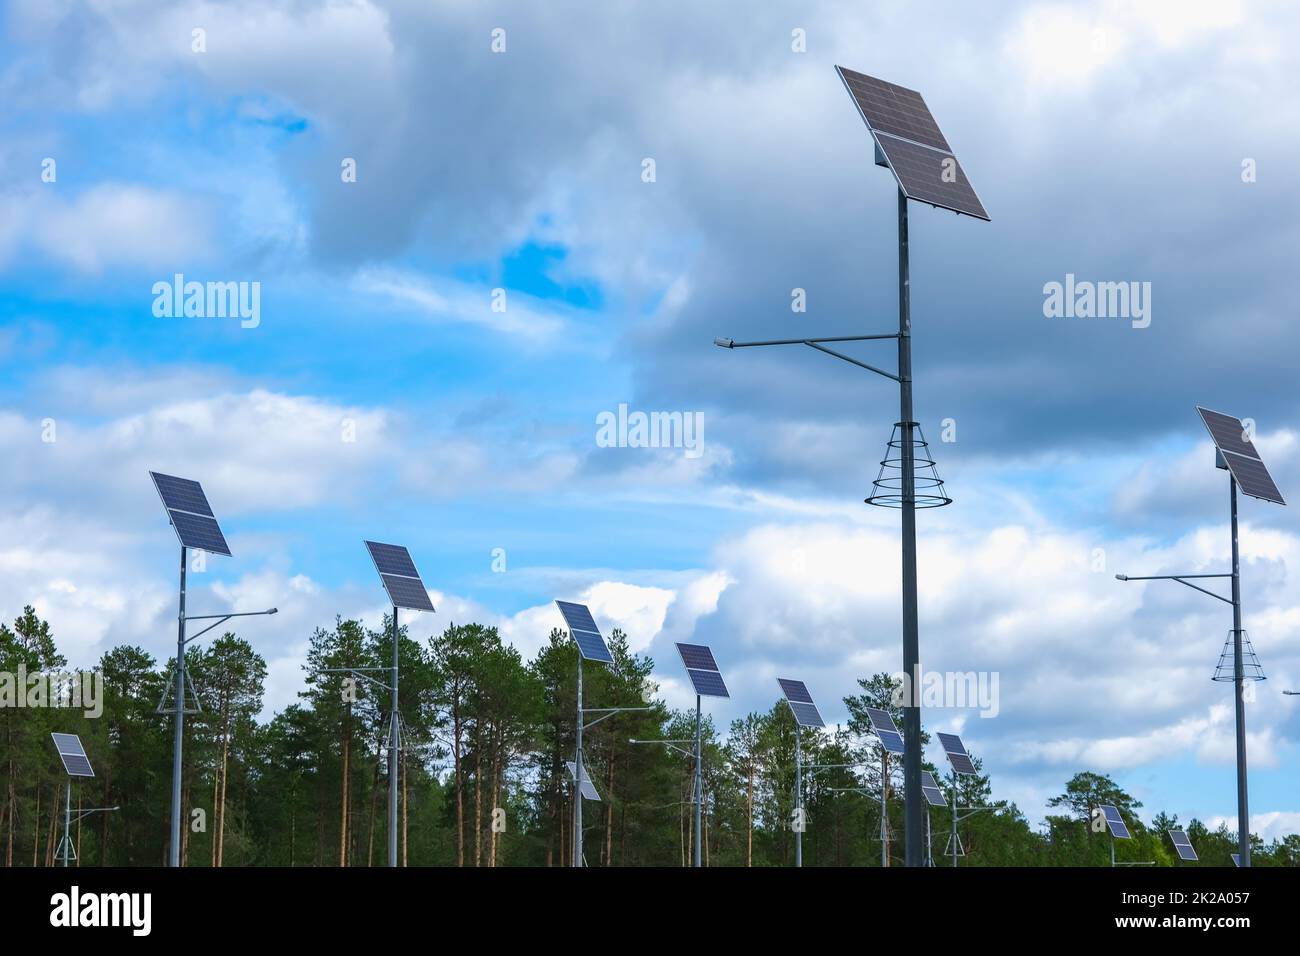 Solar panels on lampposts. Renewable energy sources in the countryside. Stock Photo